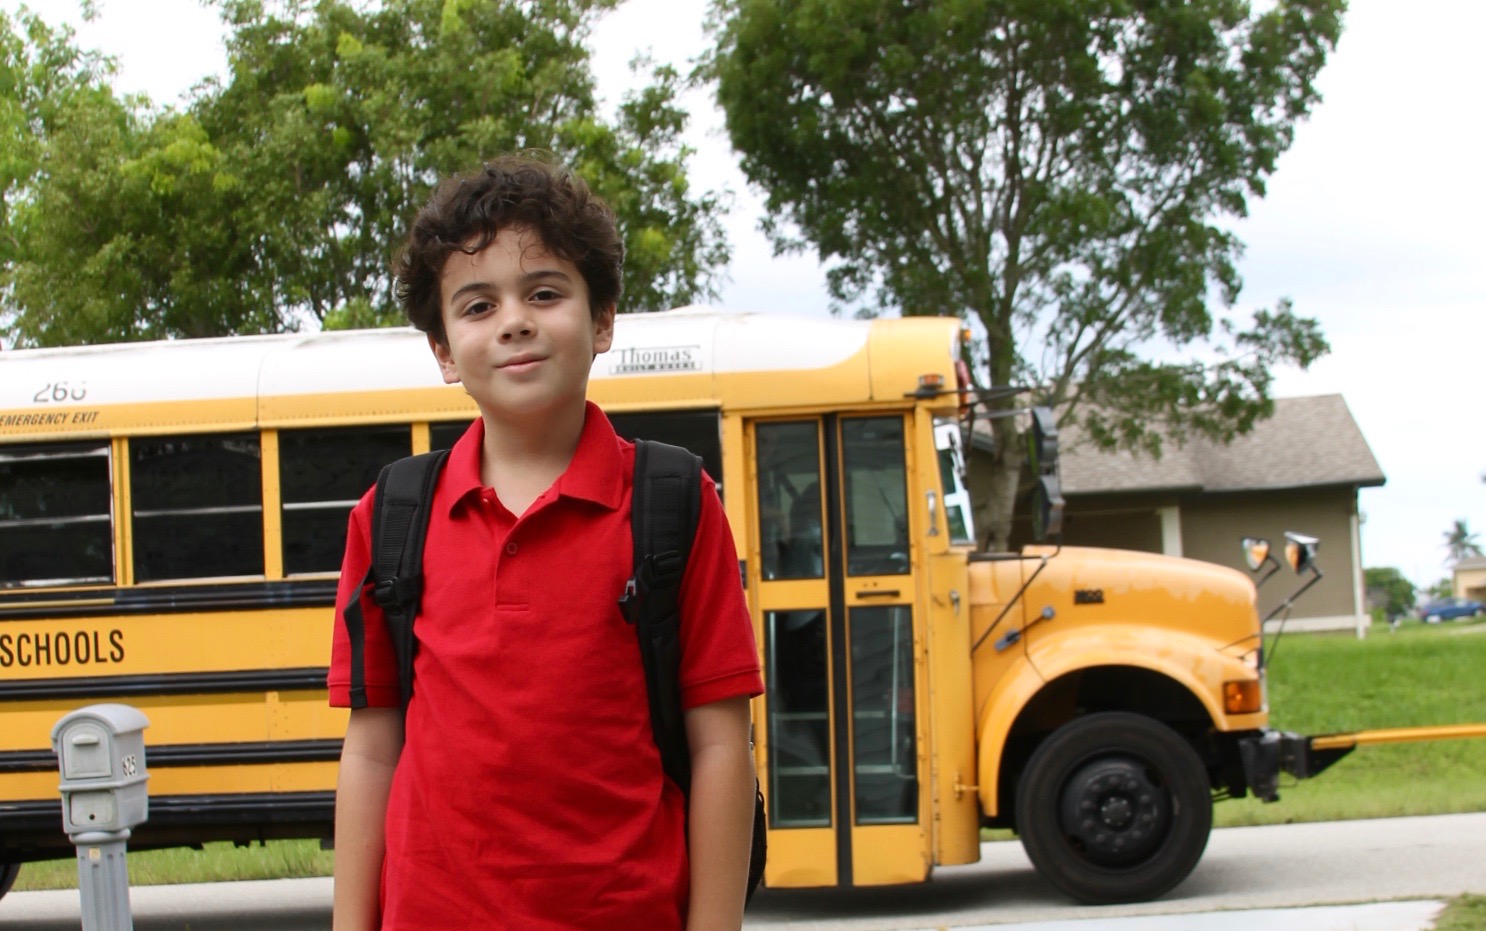 Latino boy in front of bus